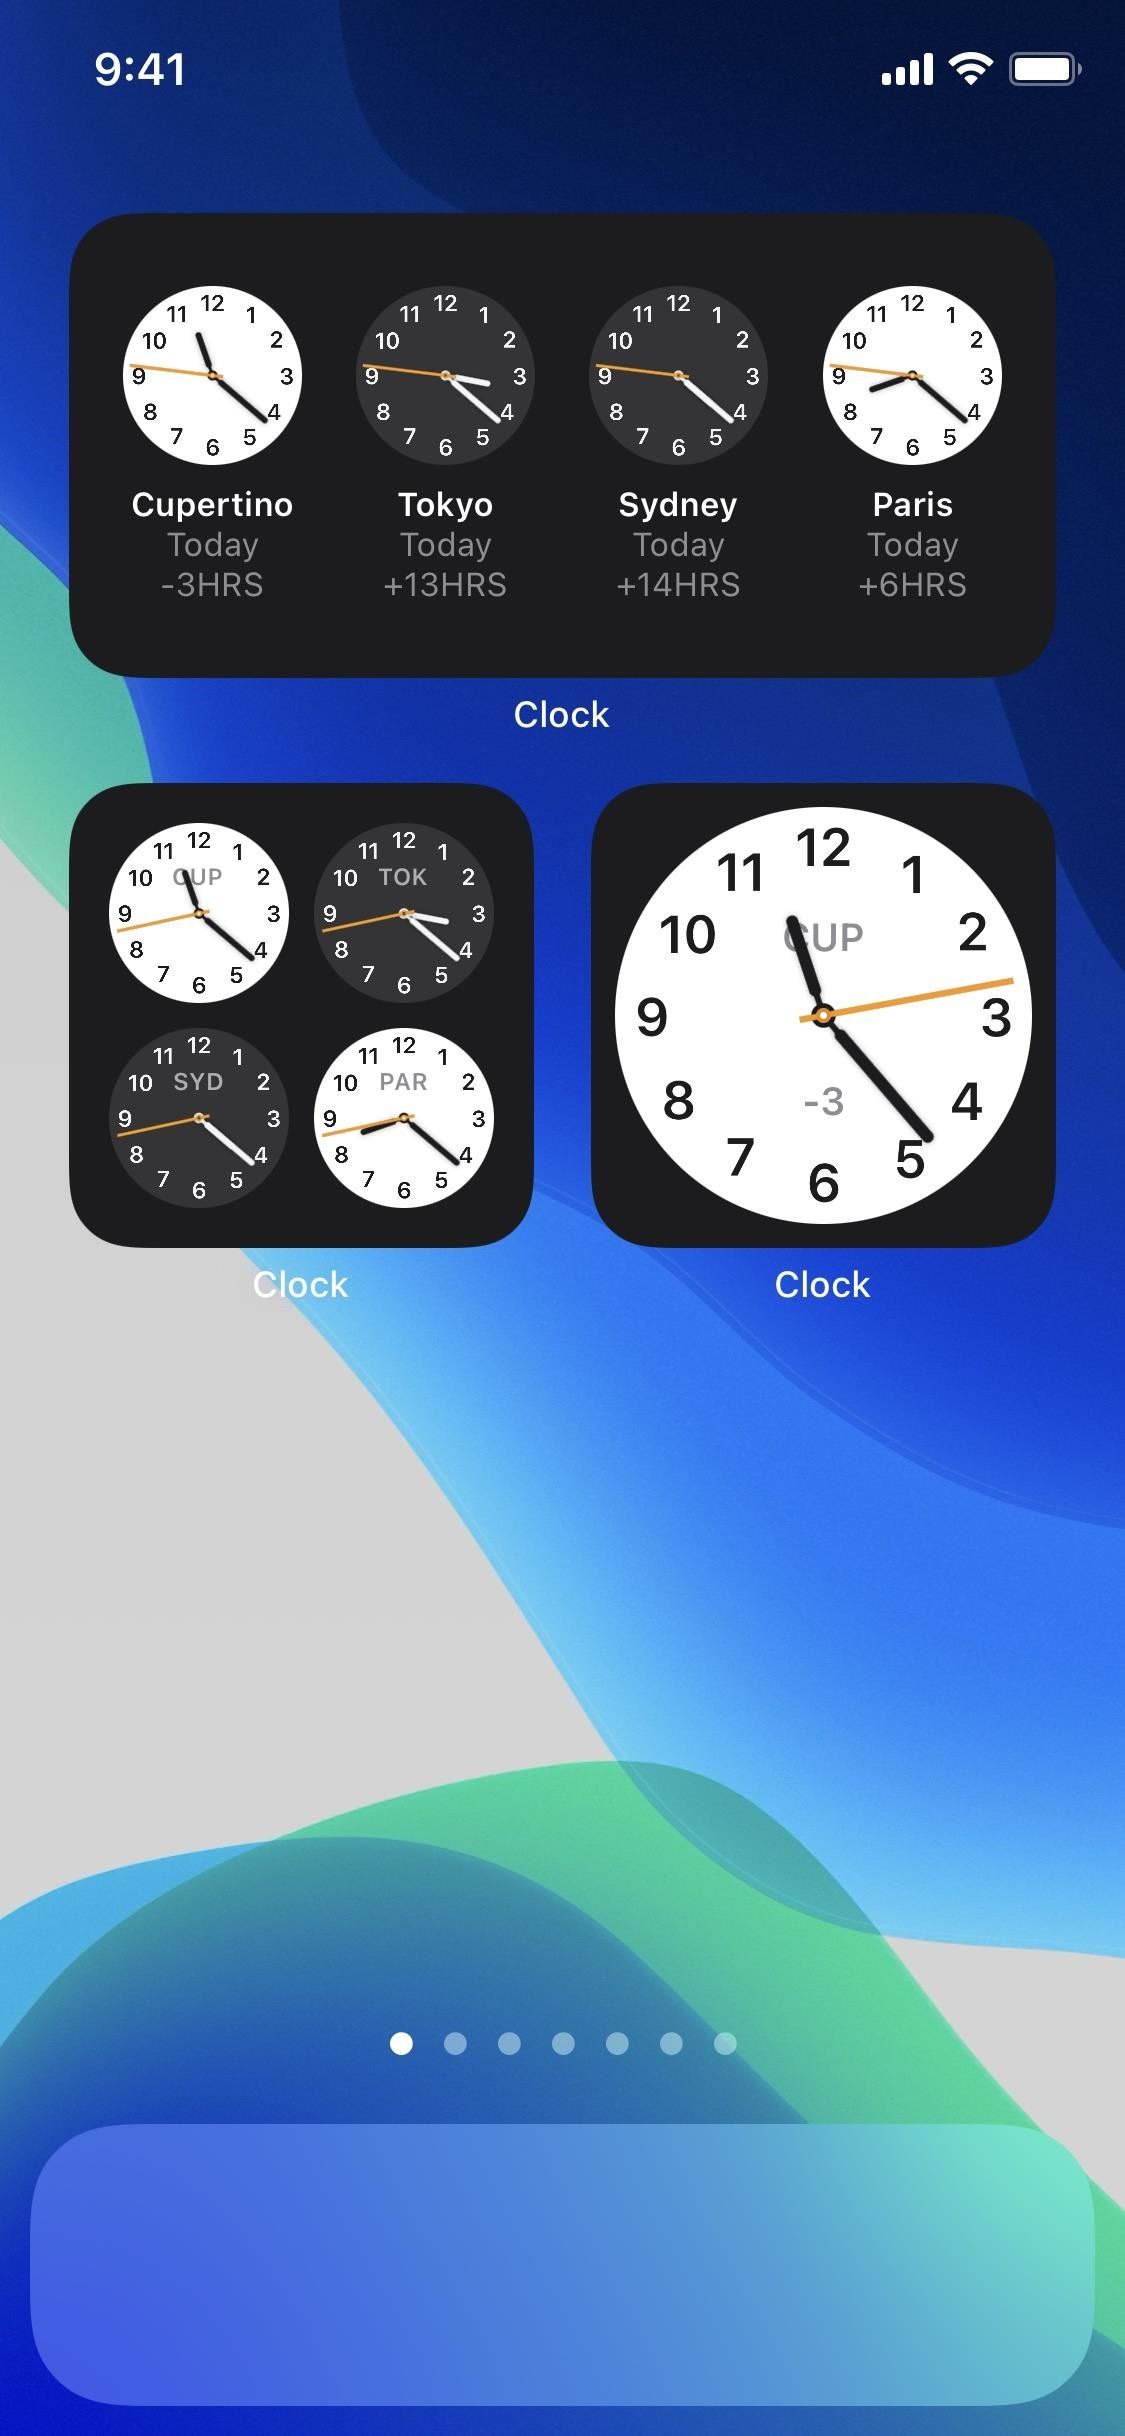 Apple Releases iOS 14 Developer Beta 3 for iPhone, Includes New Clock Widget, Refreshed Music Icon & More